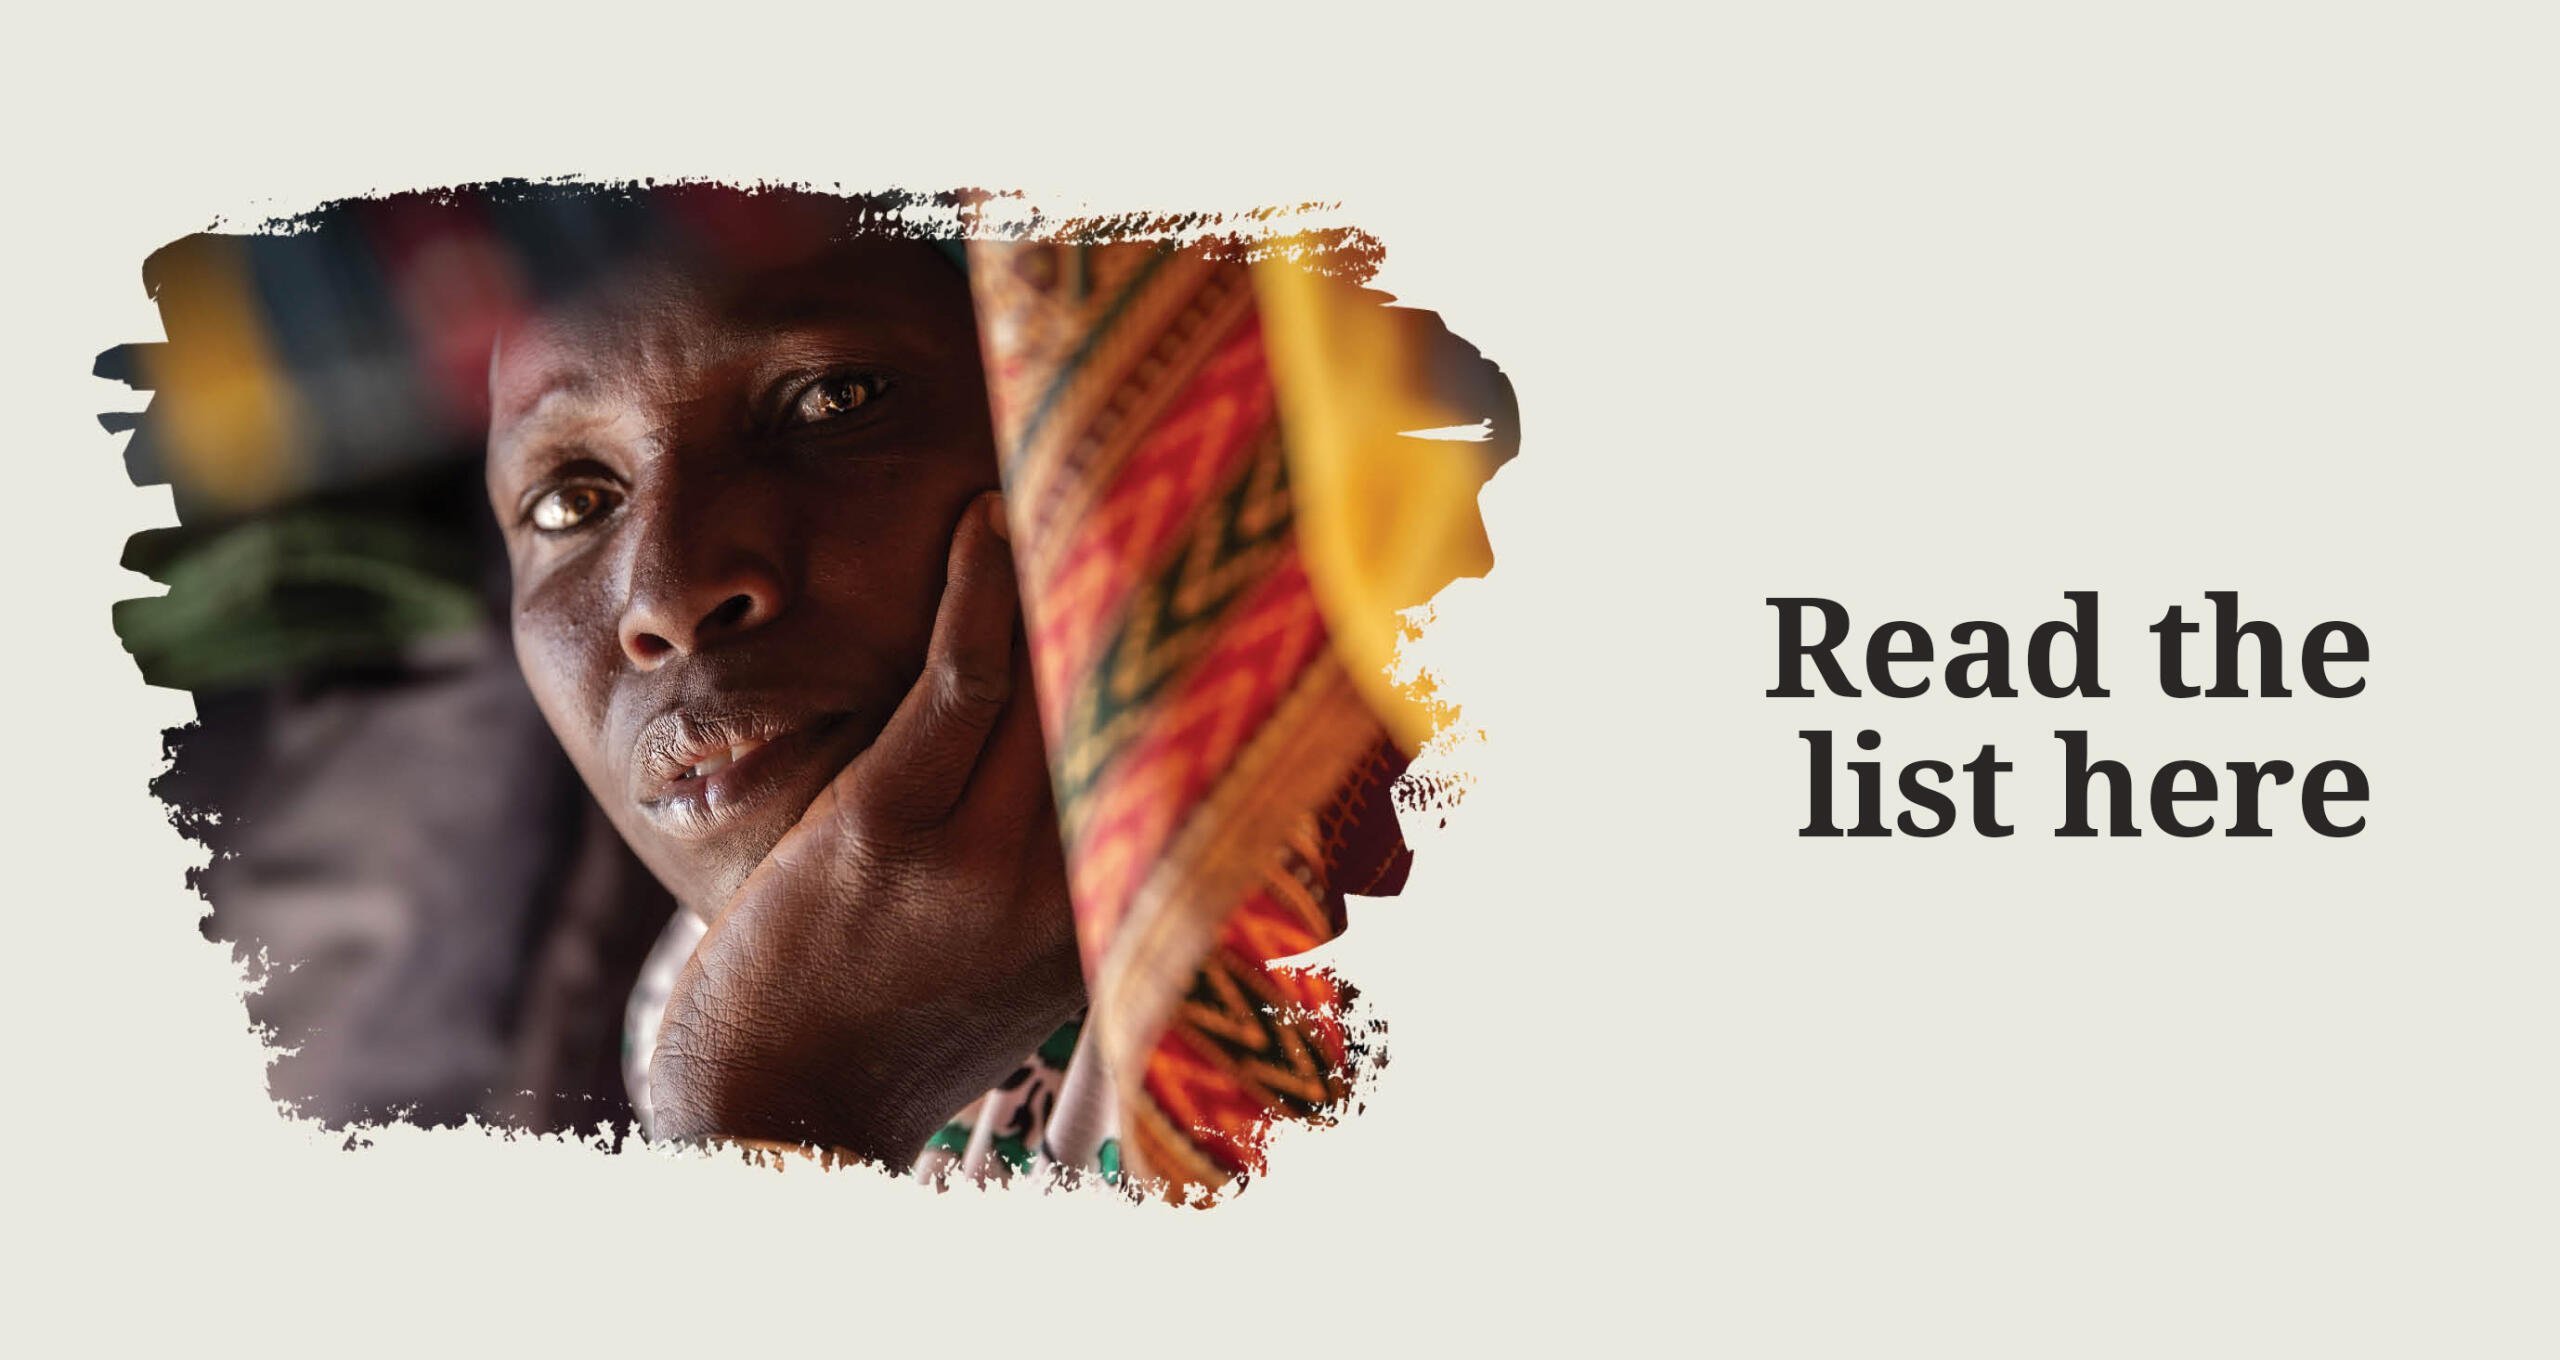 The 10 most neglected displacement crises - click to see the list